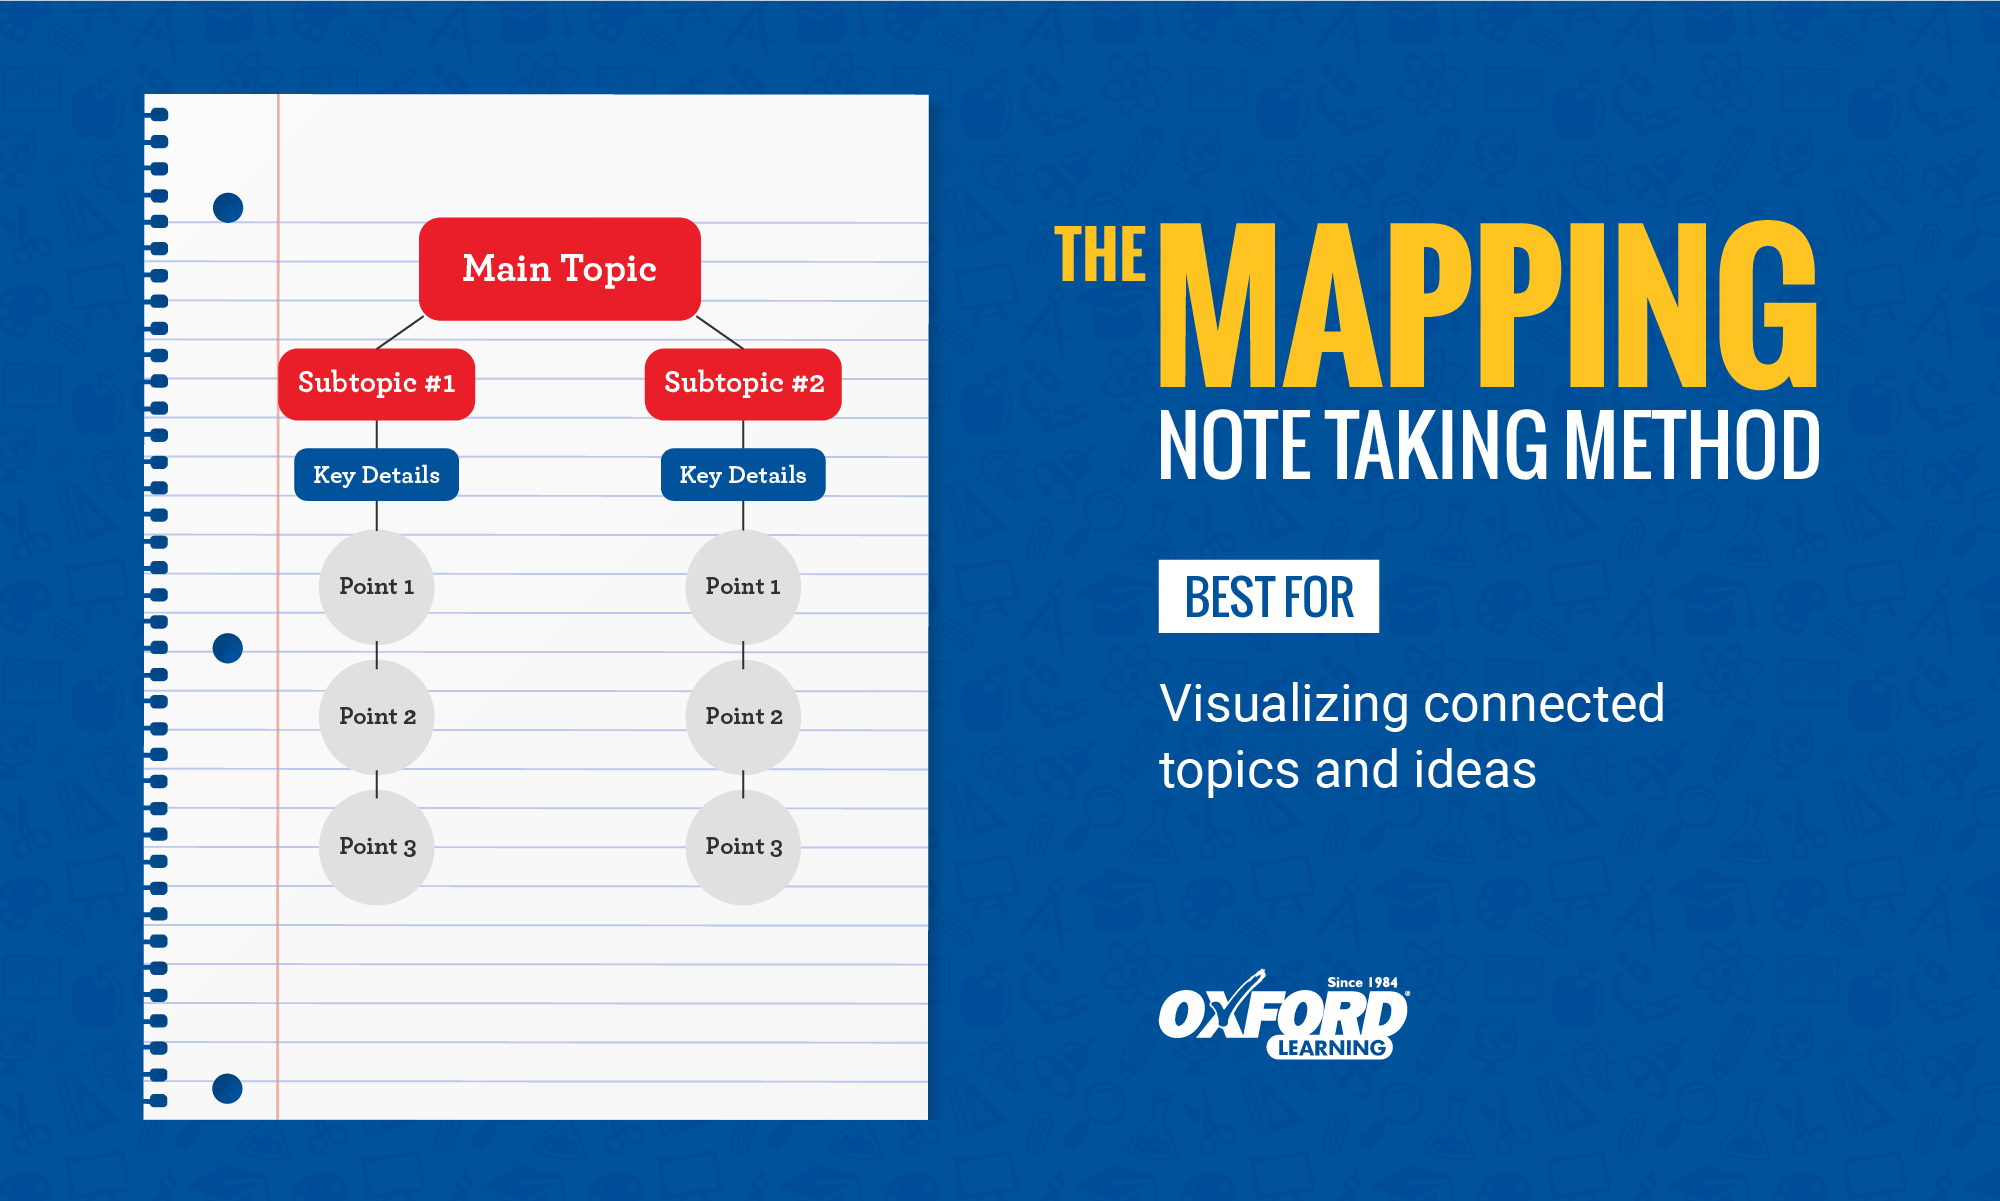 https://www.oxfordlearning.com/wp-content/uploads/2017/05/Note-Taking-Mapping-Method.png